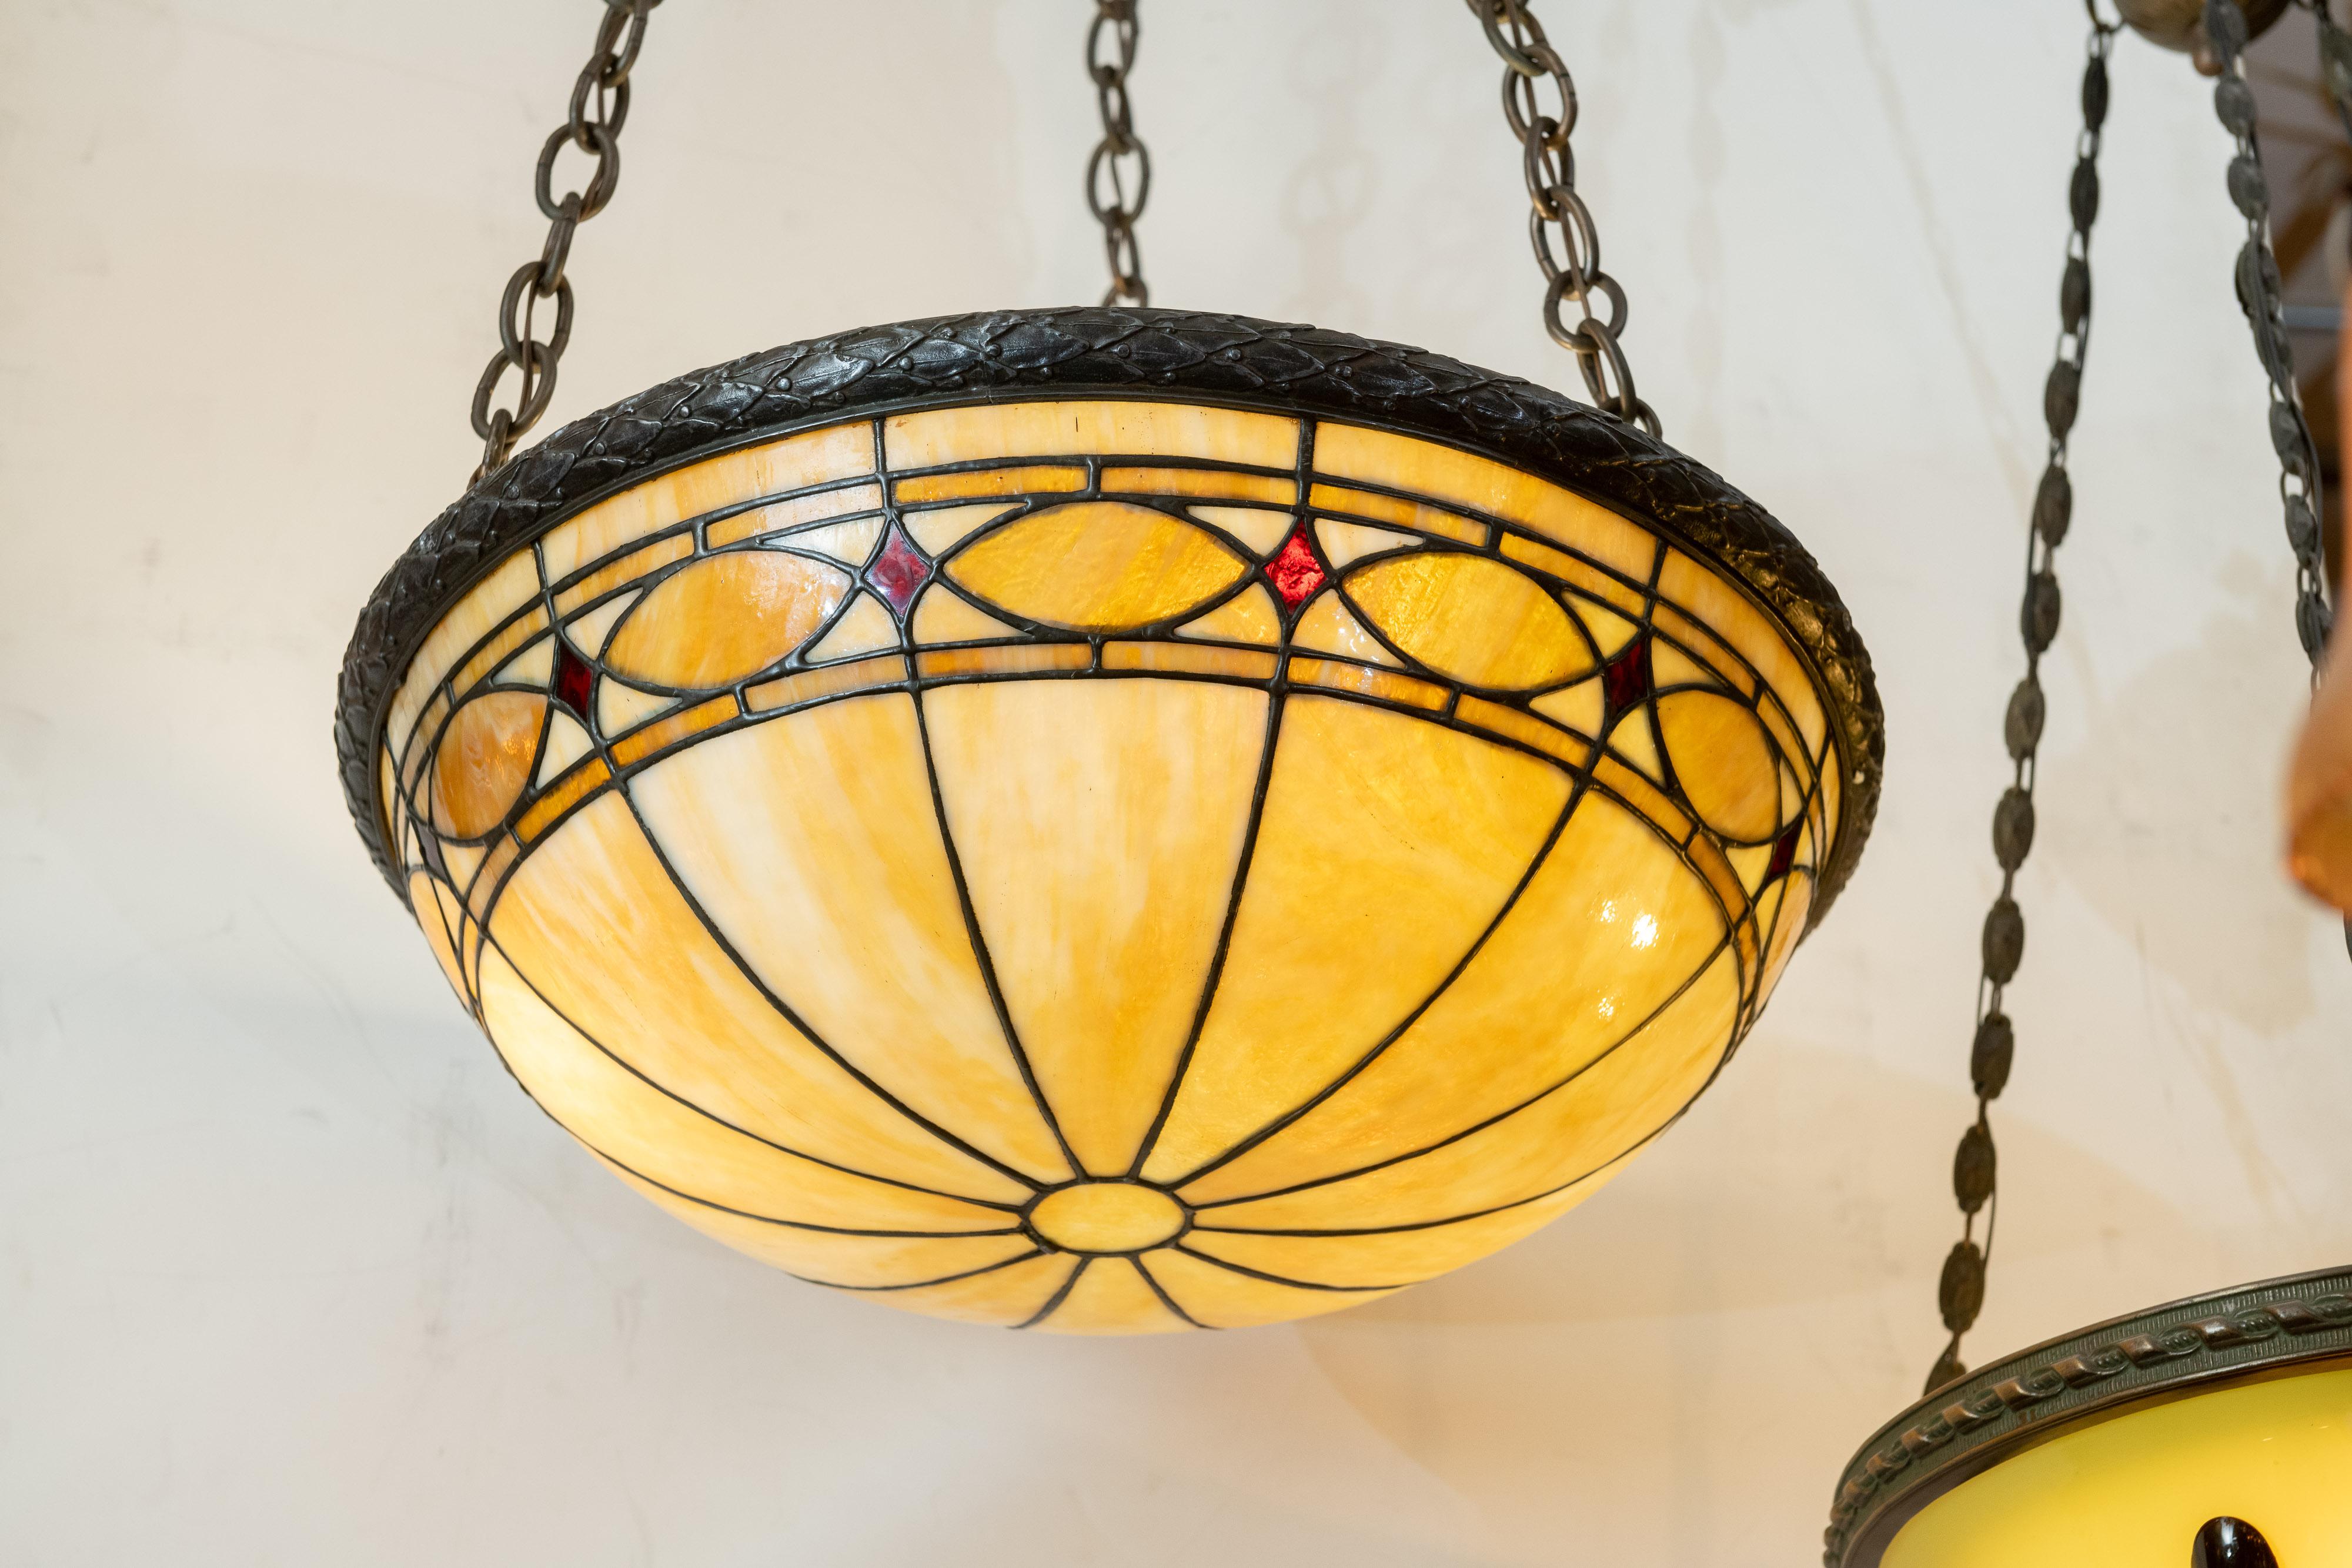 From our experience in selling much leaded glass lamps and chandeliers over 4 decades that these inverted domes are rare and extremely desirable. The typical leaded glass chandelier has an open bottom and so when you look up, the light bulbs can